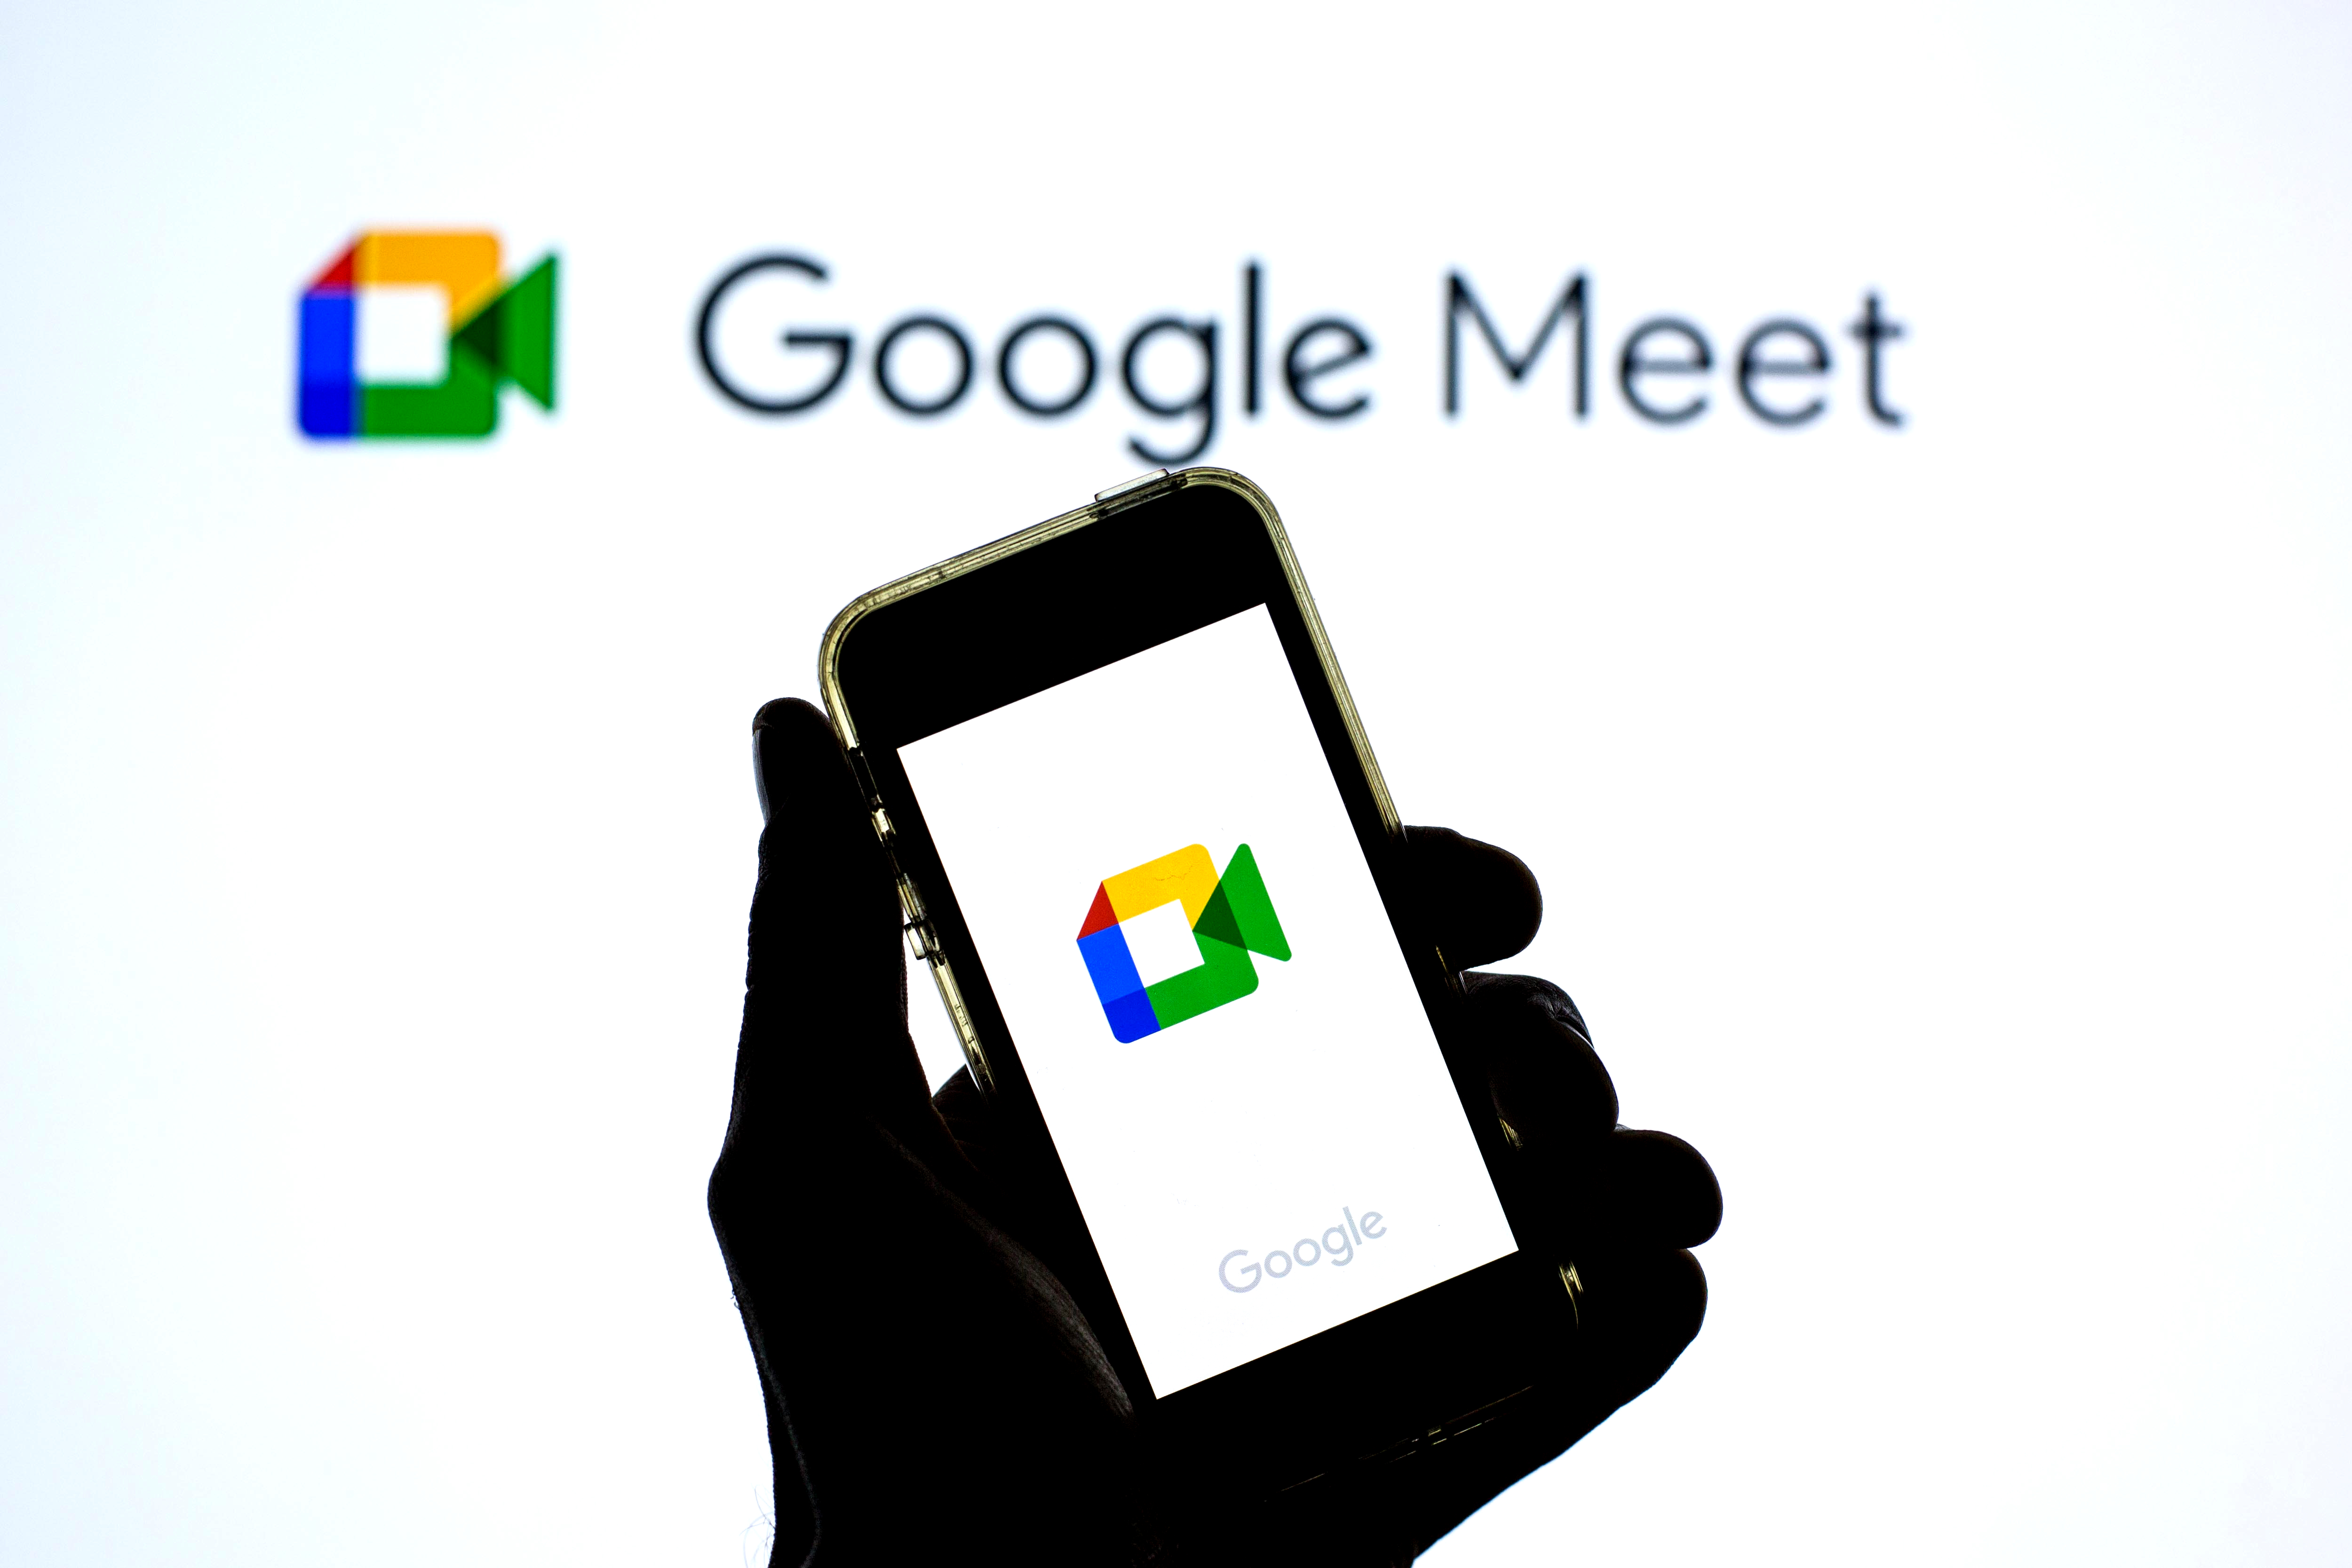 Google decided having two apps called Meet was a good idea